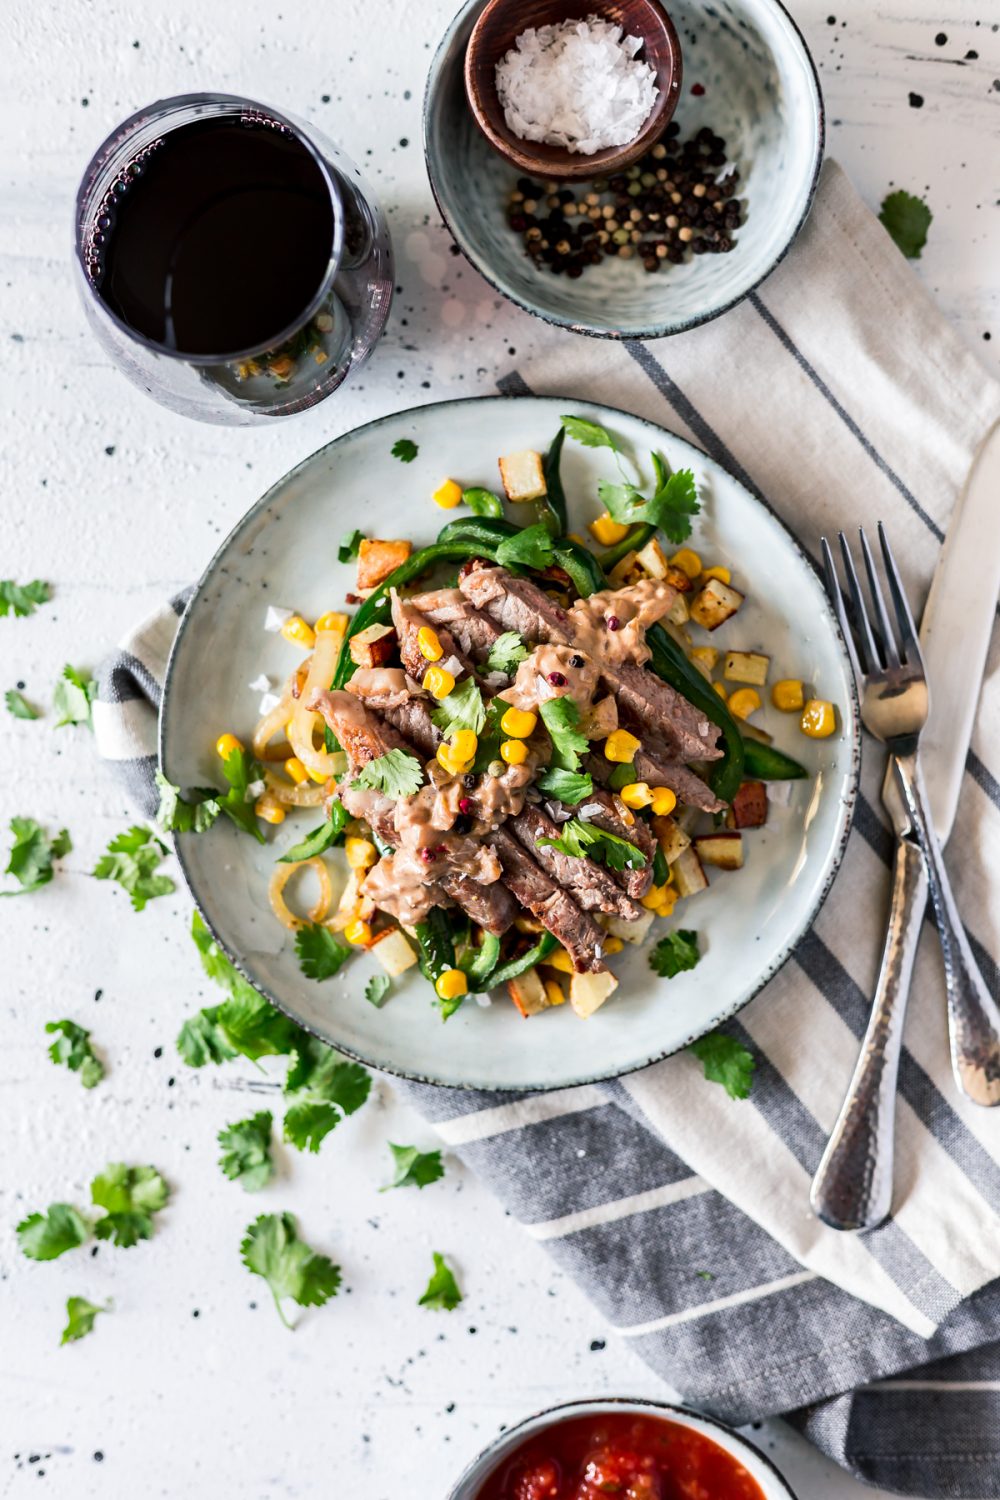 Get your summer grilling on with easy Mexican recipes like this Seared Steak with Corn, Poblano, and Roasted Potato Hash! Dinner is served. | asimplepantry.com